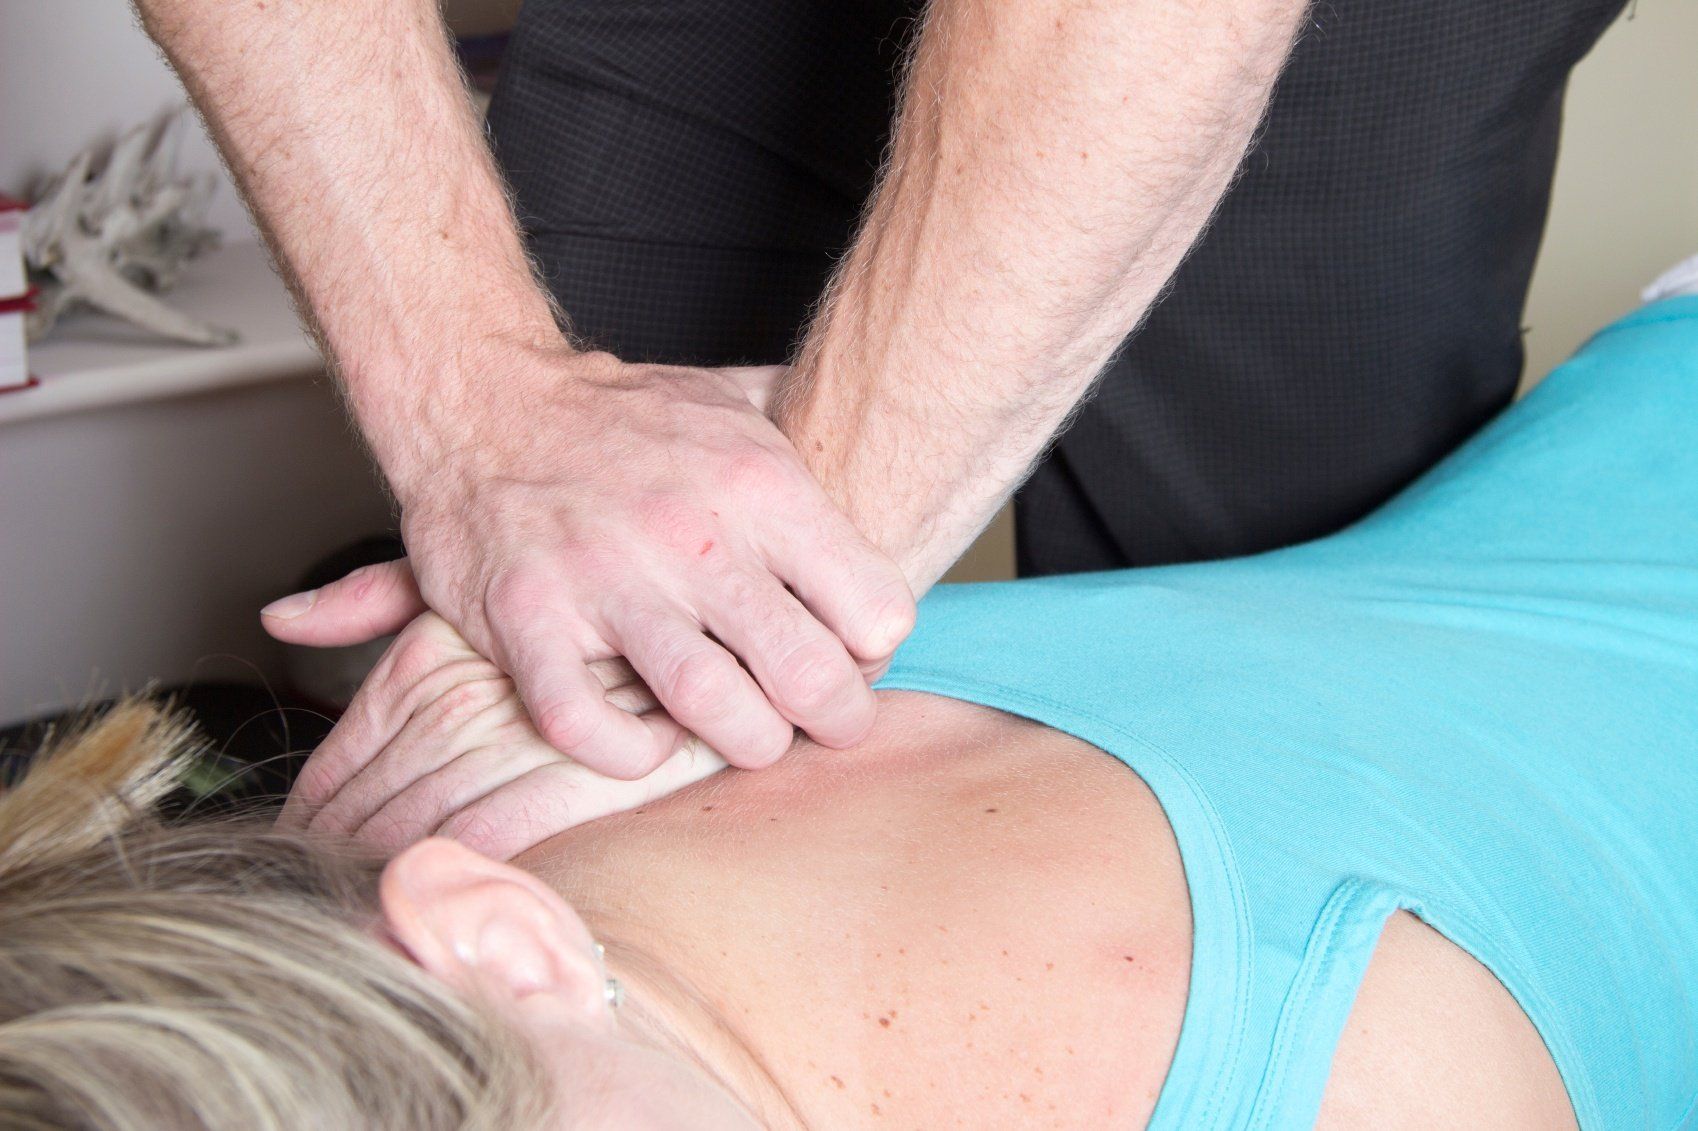 How to find the best chiropractor?